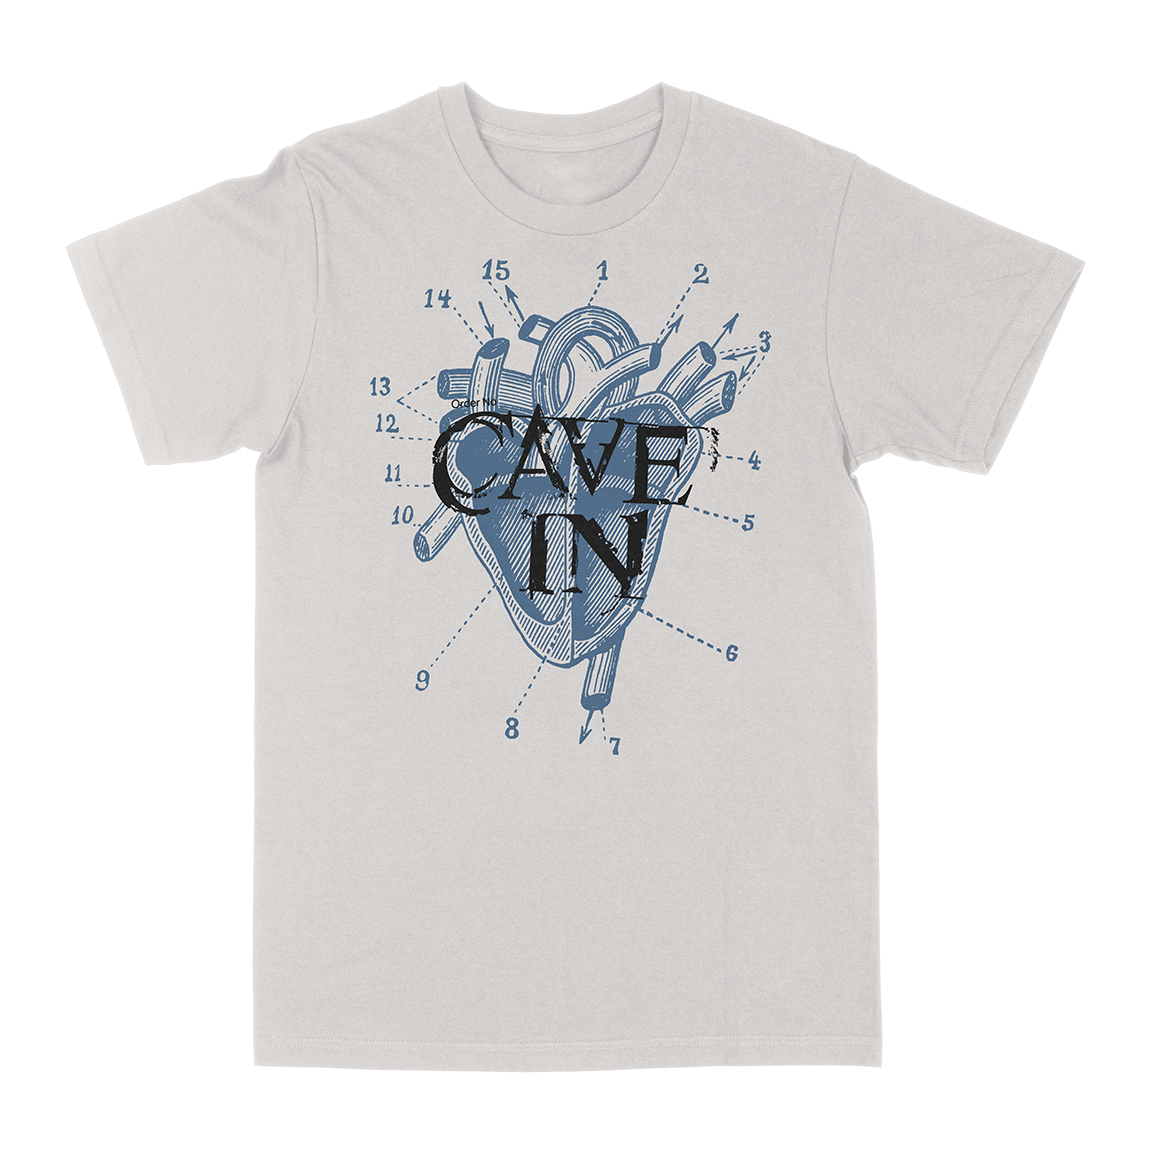 CAVE IN "UYHS Heart“ Vintage White T-Shirt